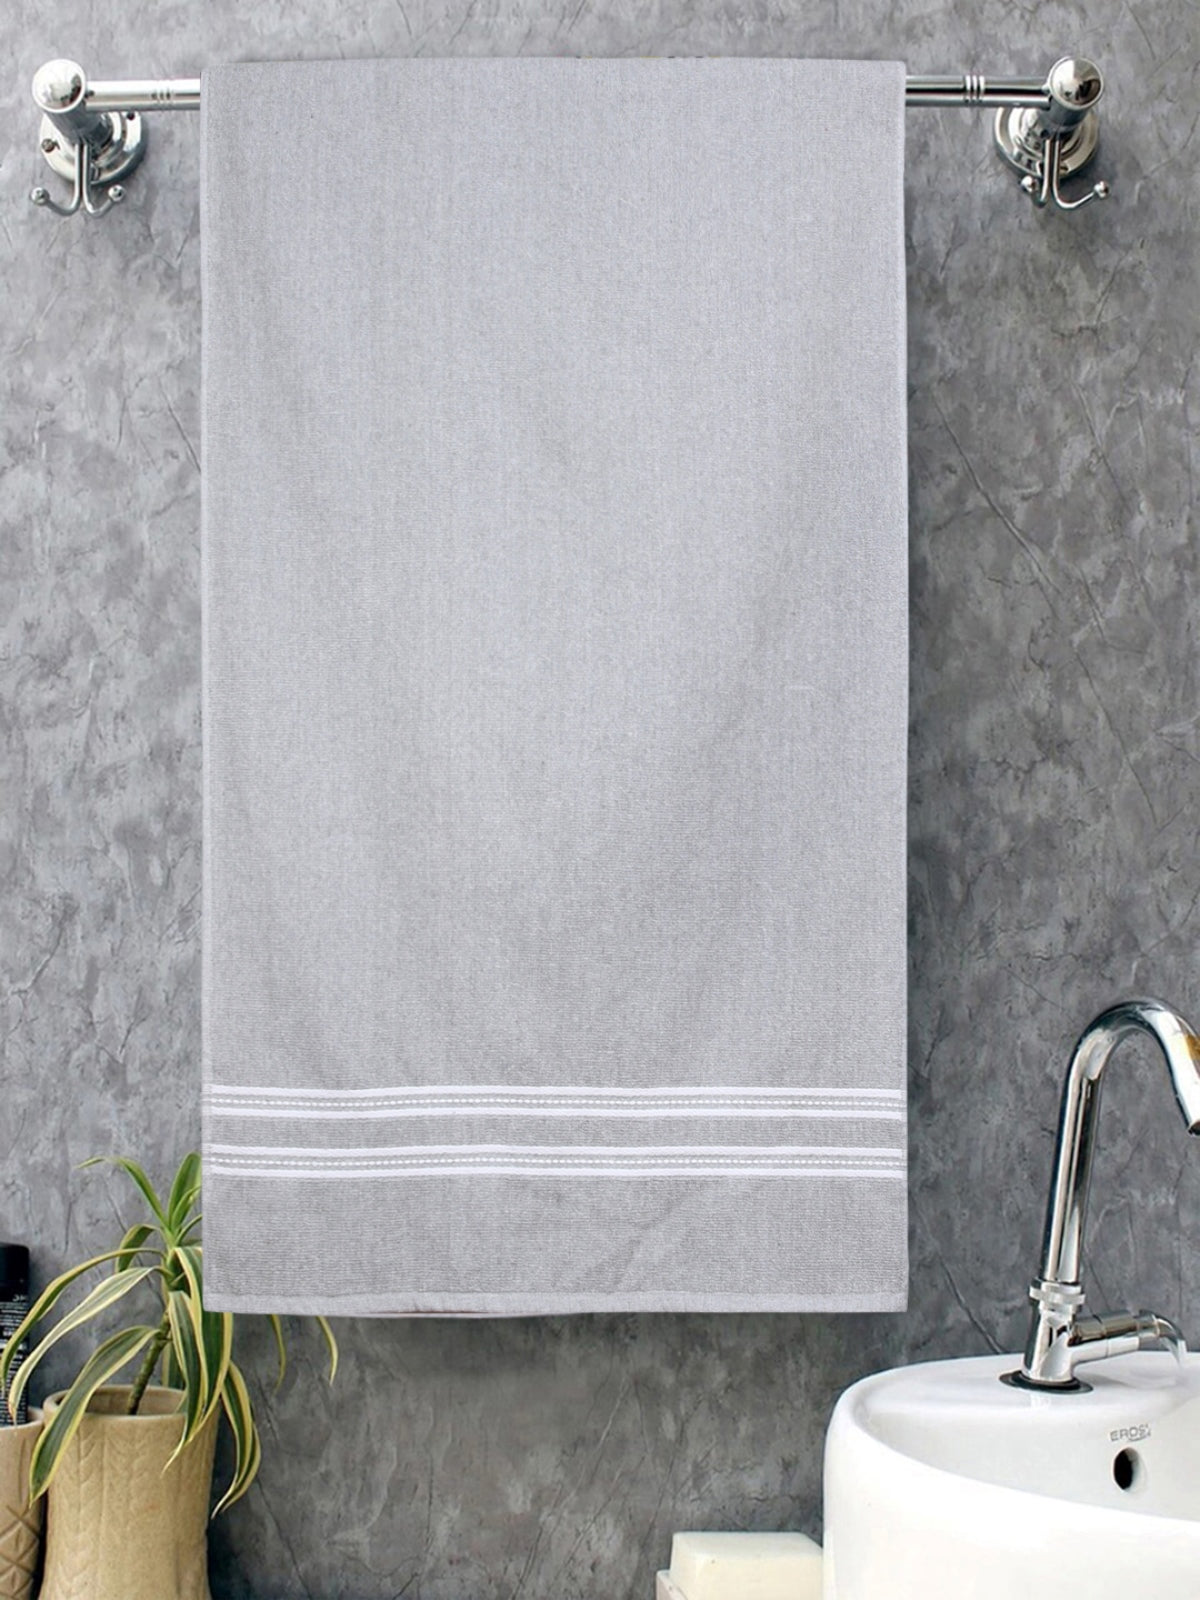 Silver Solid Patterned Cotton Towel